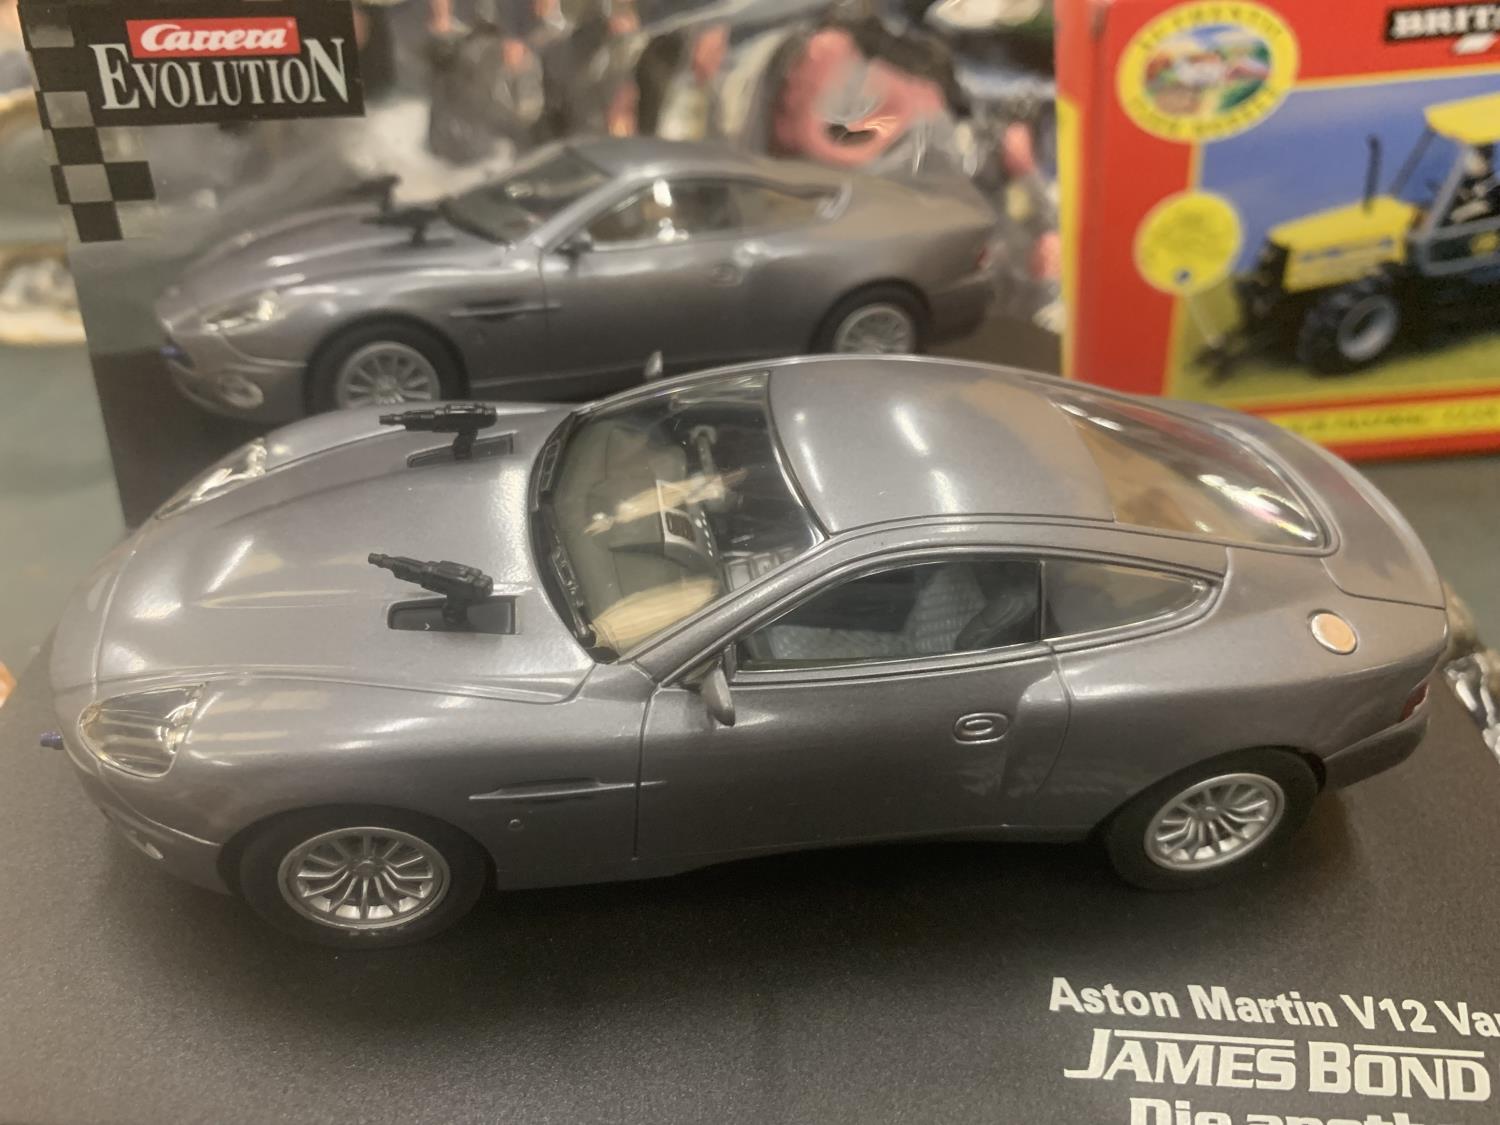 A CARRERA ASTON MARTIN V12, JAMES BOND 007, (SCALEXTRIC) DIE ANOTHER DAY MODEL CAR, BOXED - Image 3 of 4